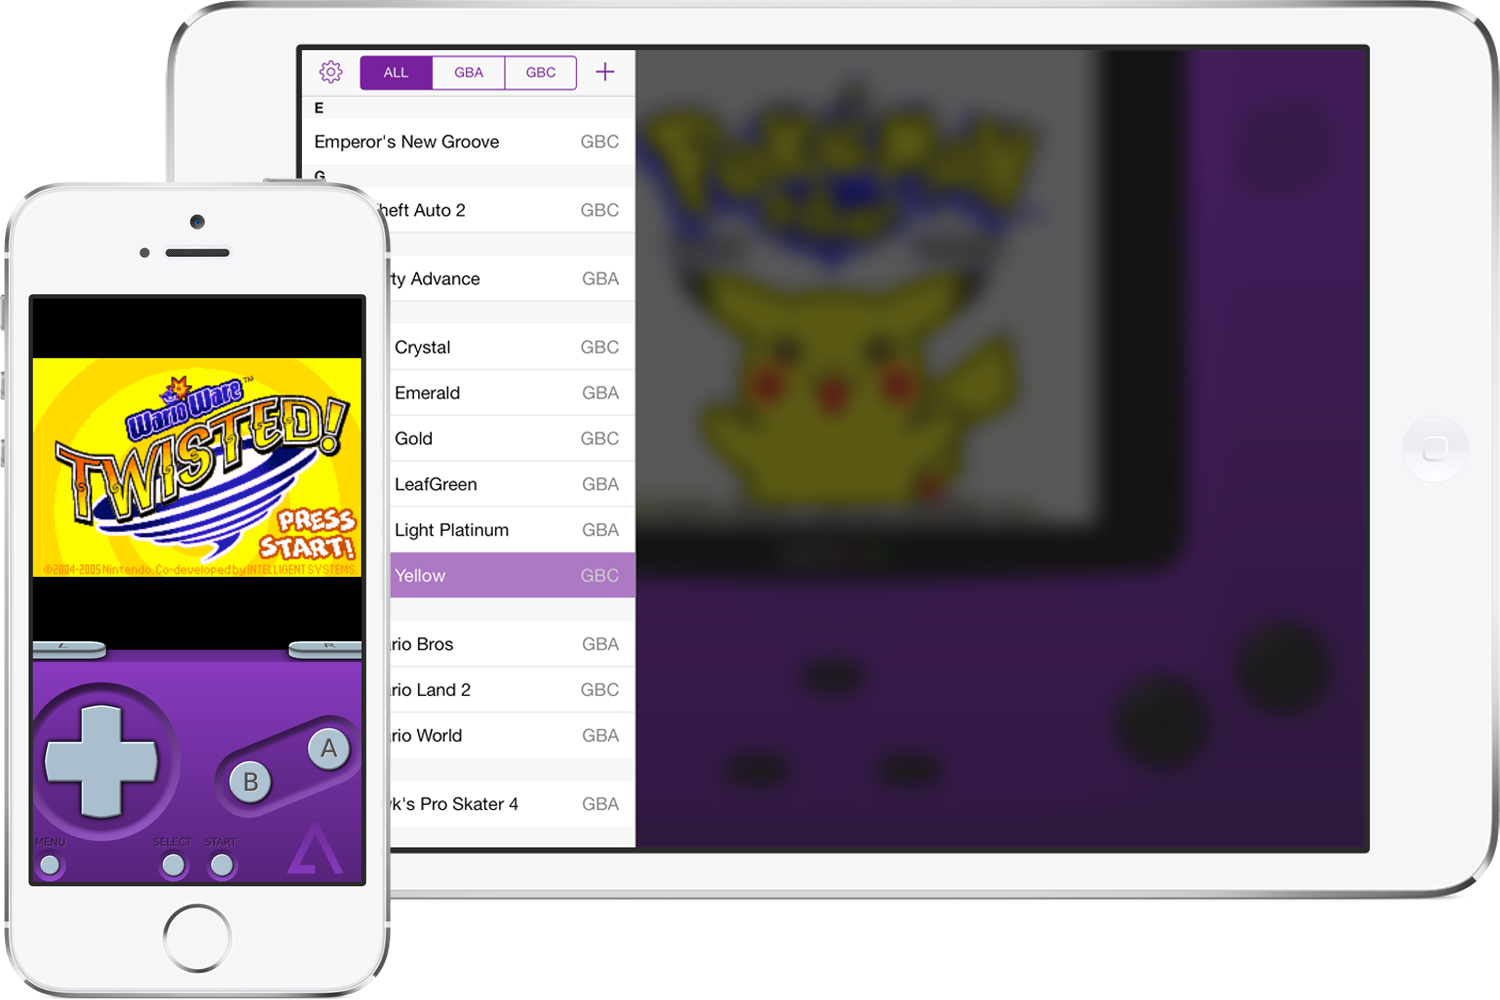 How to download any free gba emulator for ios without needing jailbreak or  a pc to set it up? Preferably with speed up option, save states, cheats  etc. Is there really no